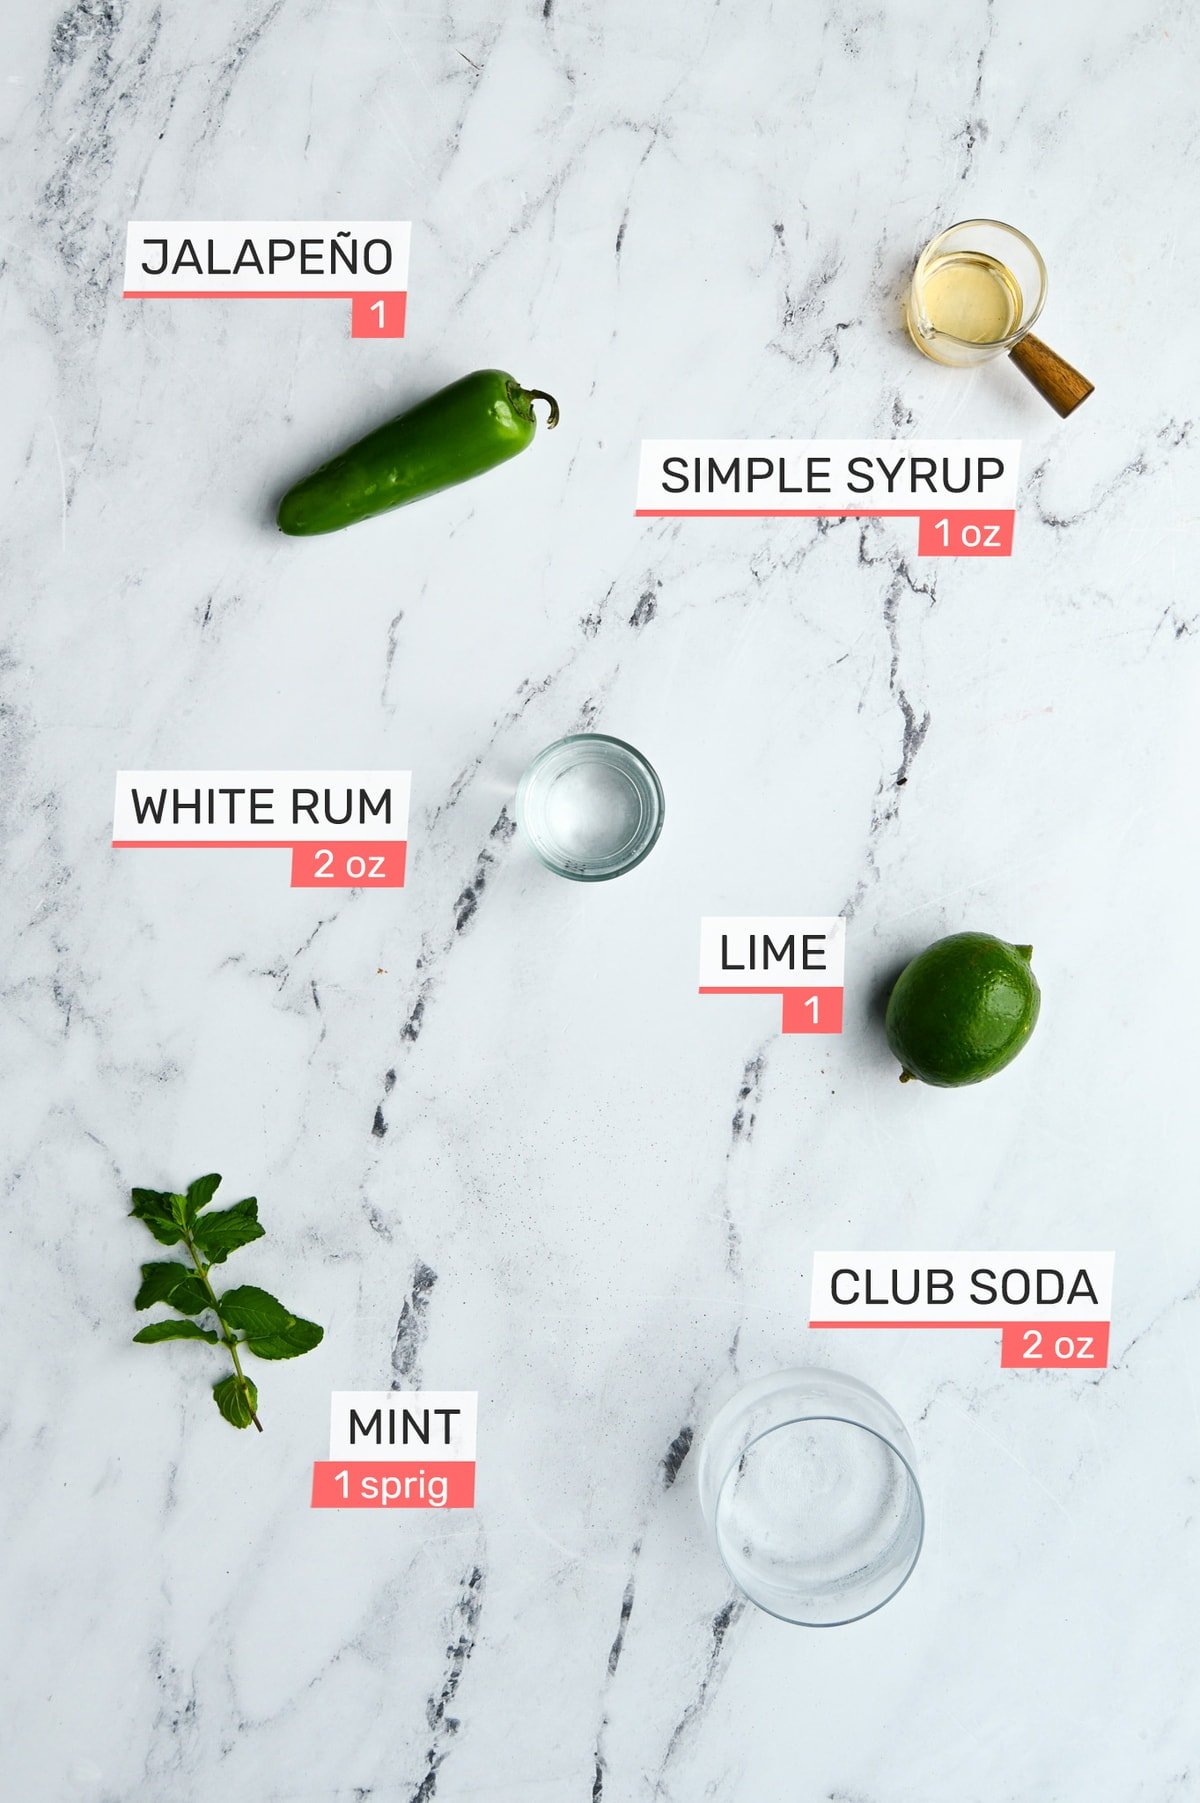 jalapeno, simple syrup, lime, white yum, mint, club soda